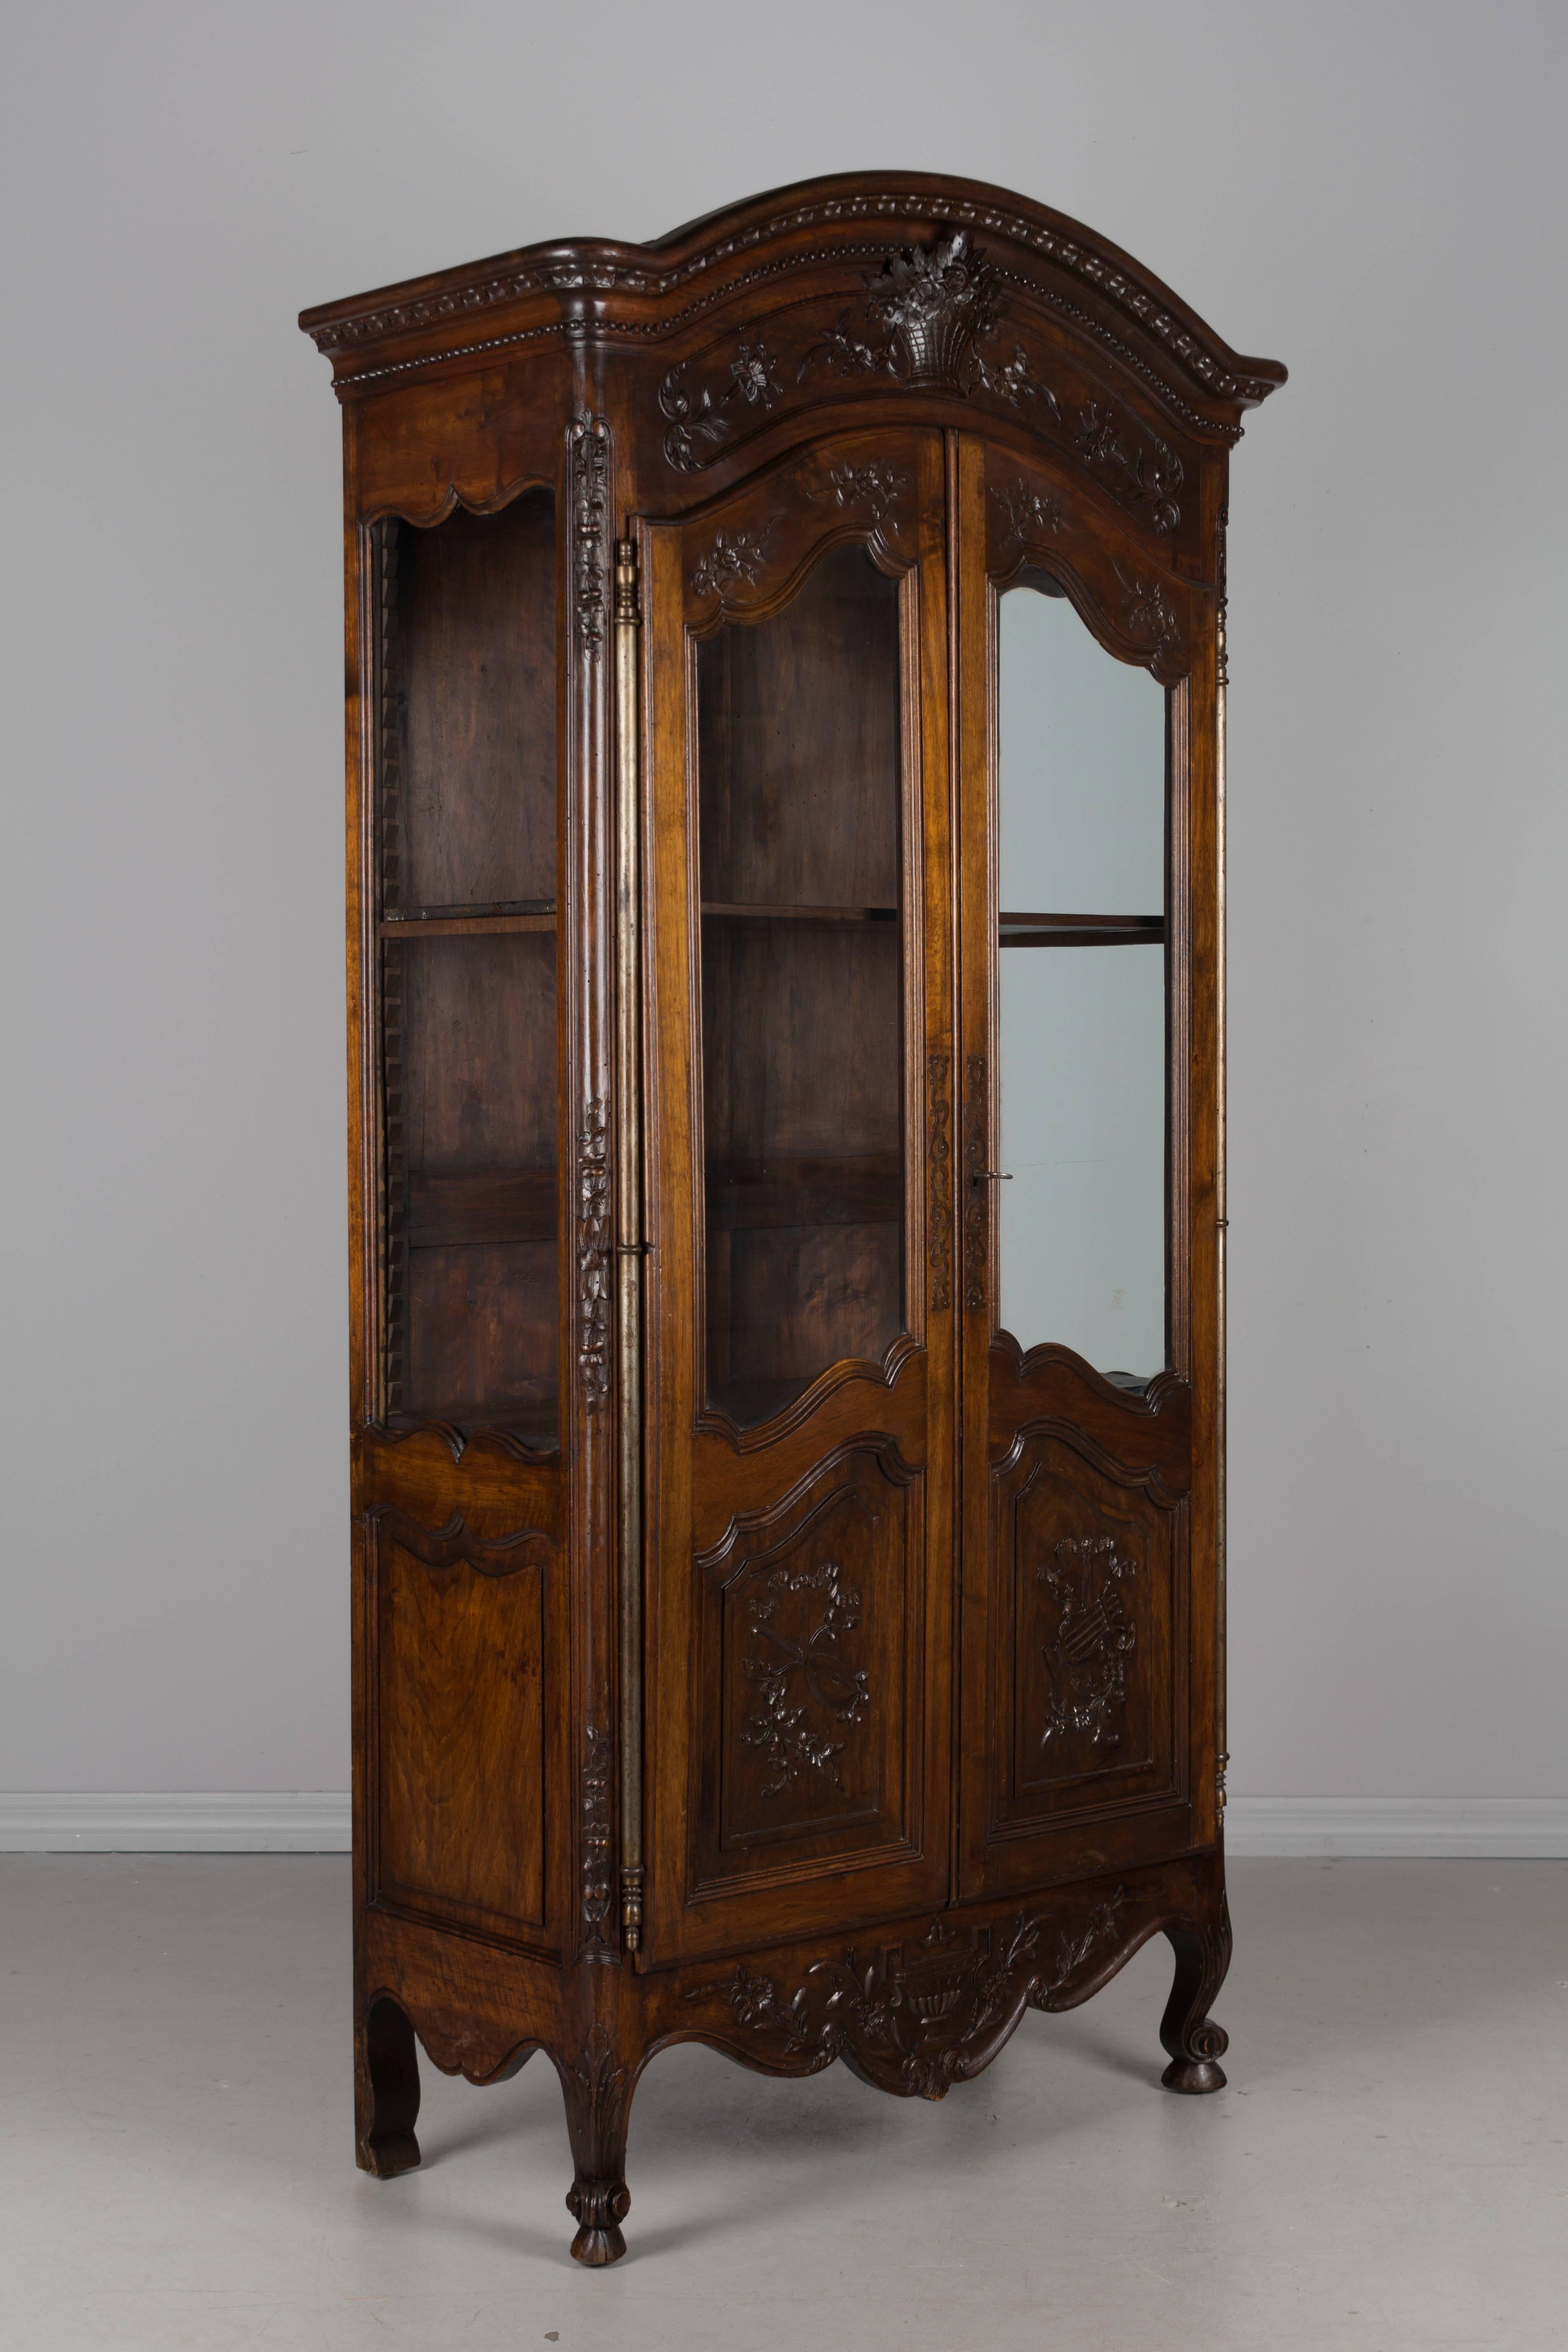 An early 20th century French Louis XV style Provençal vitrine, or display cabinet. Made of walnut and with nice floral carvings including a flower basket below a chapeau de gendarme crown, lyres on the door panels and an urn carved in relief on the